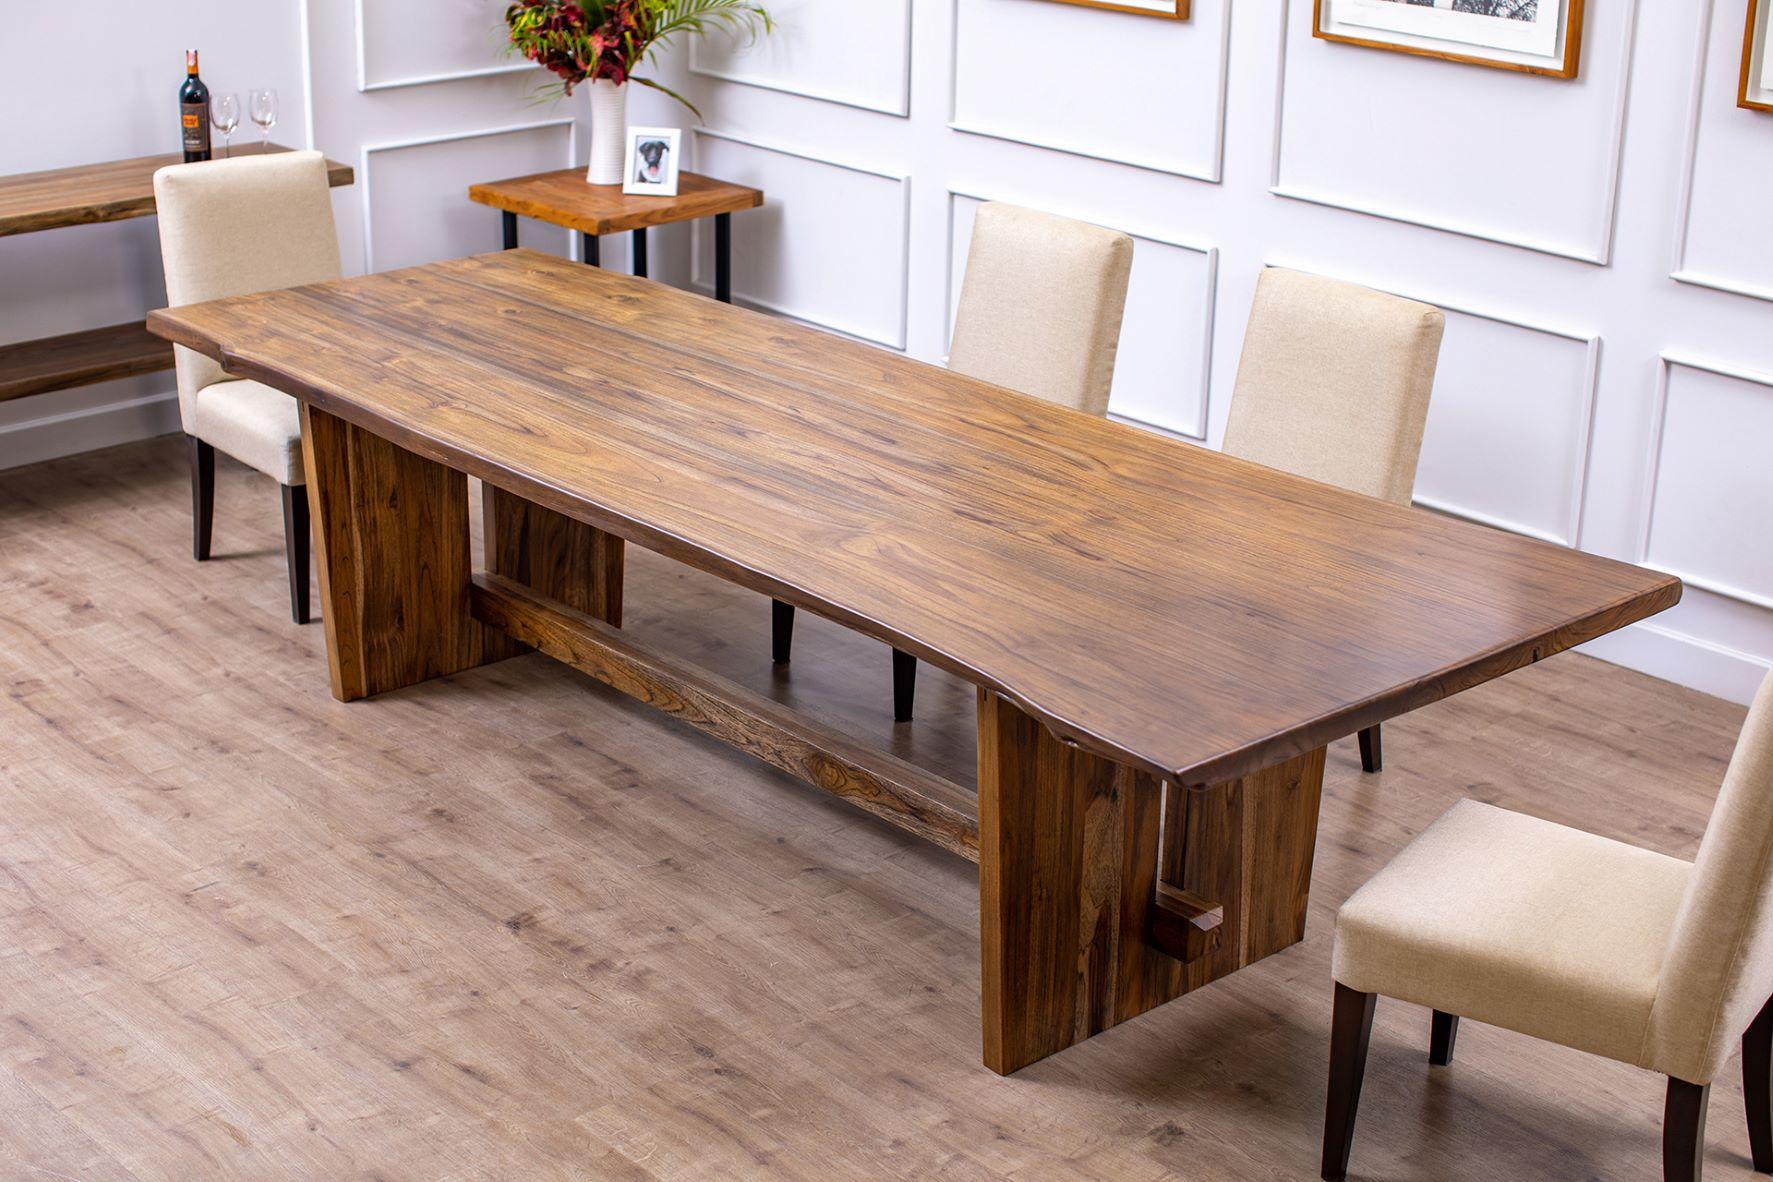 This is a truly unique piece of functional art, book-matching two pieces of live edge teak to create a dining table that is the focal point of the home. Expertly crafted out of 100% solid Burmese teak, this table has beams that penetrate the legs